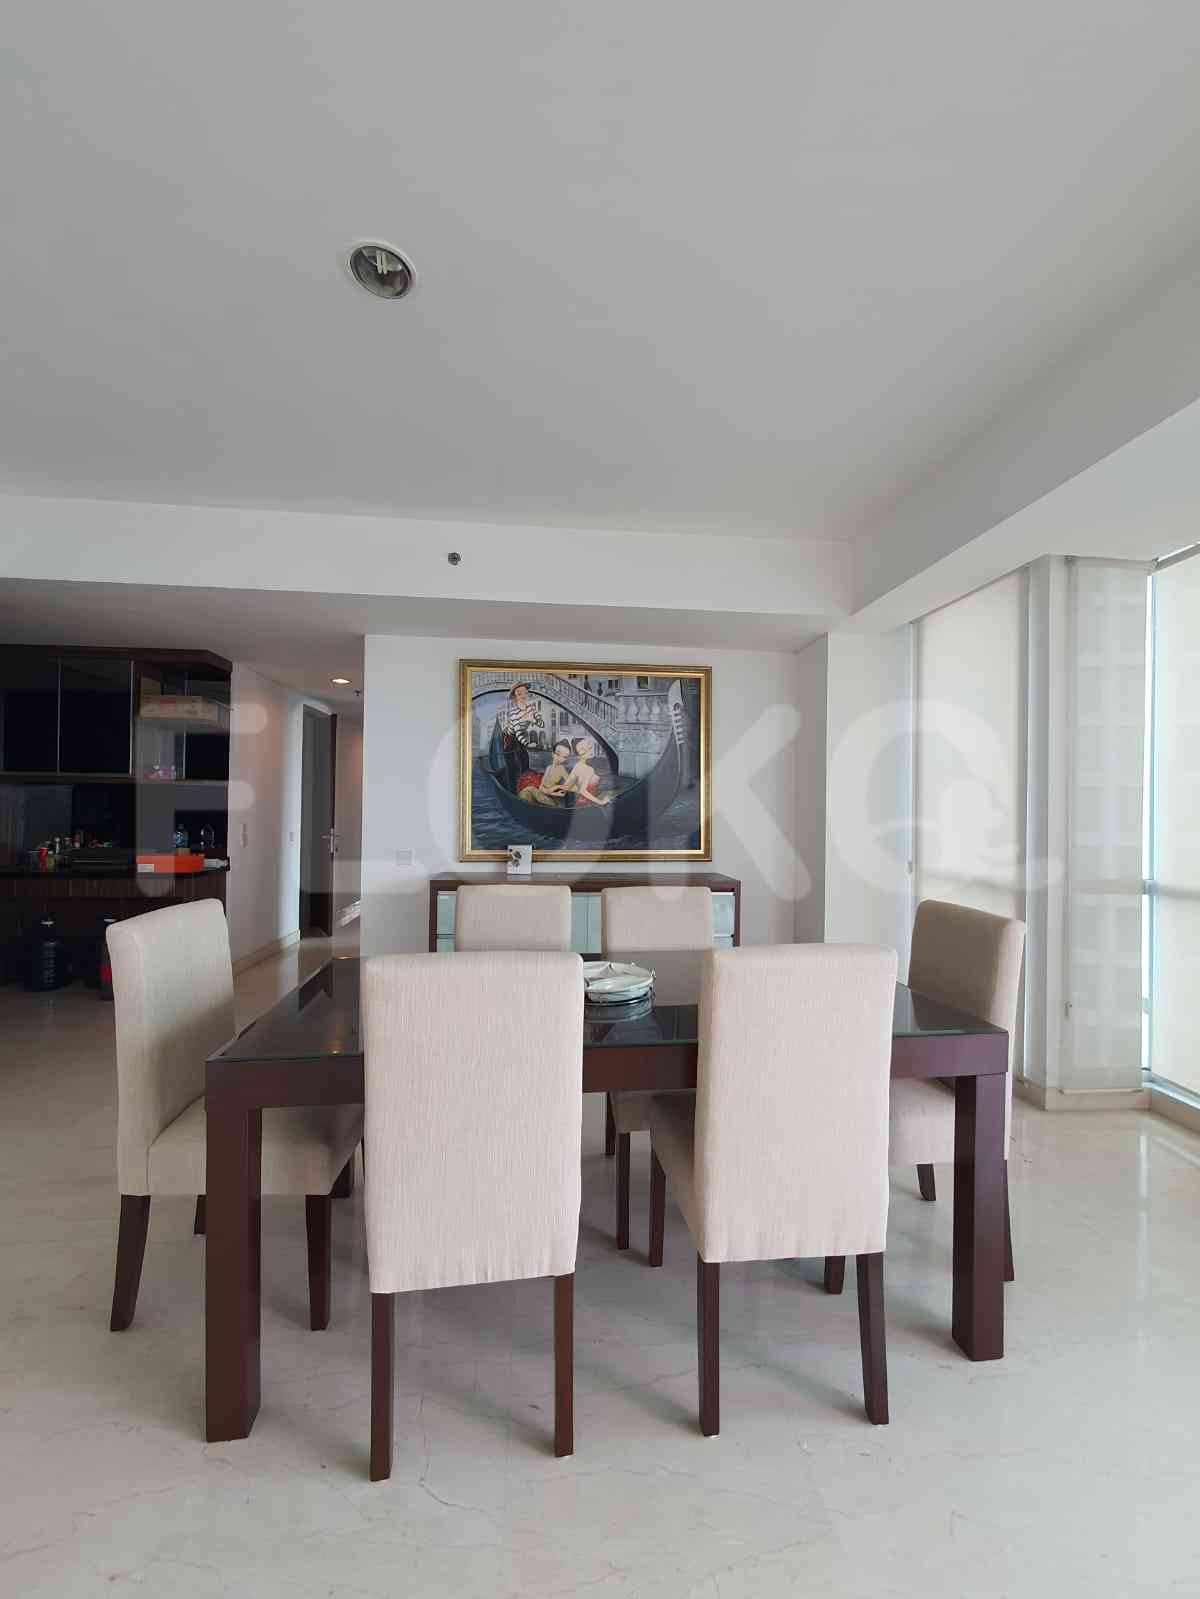 3 Bedroom on 15th Floor for Rent in Kemang Village Residence - fked84 4